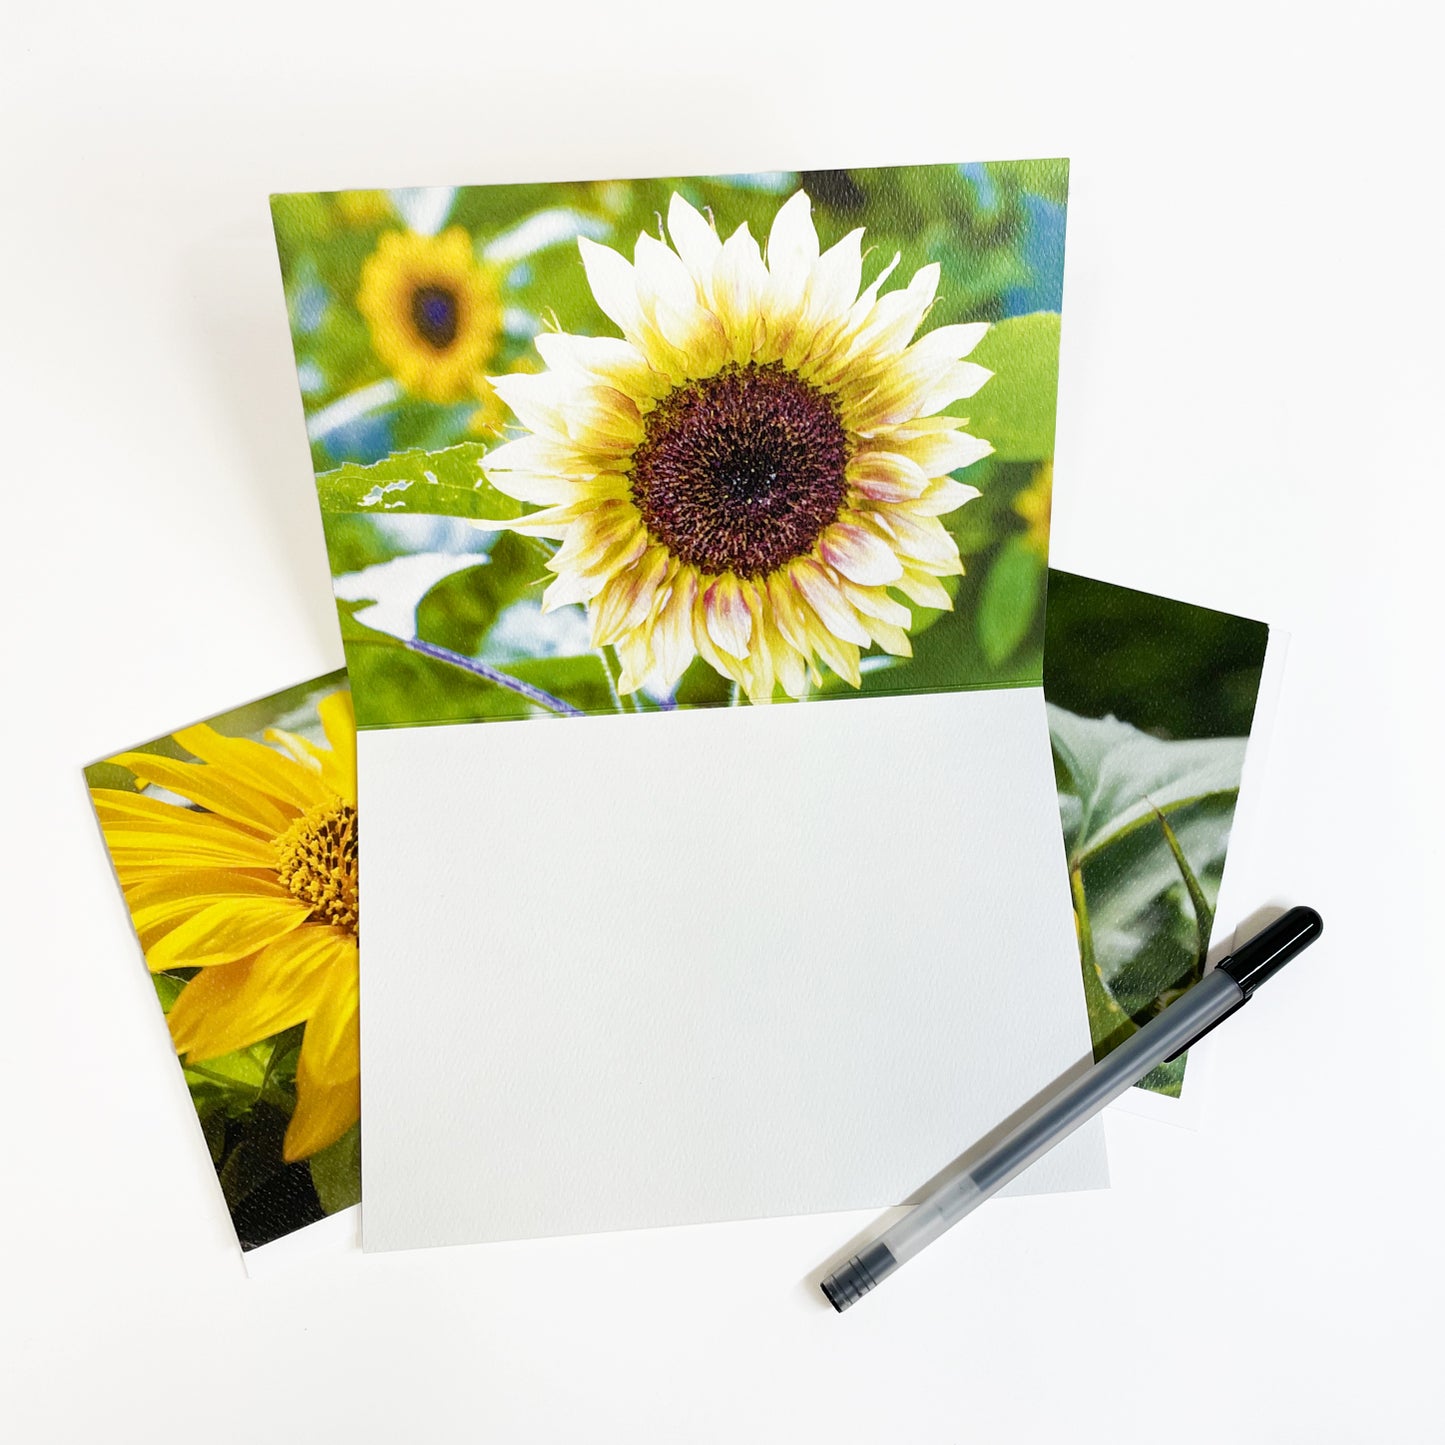 Blank greeting card featuring a photograph of a sunflower blooming on Mackinac Island by local artist Jennifer Wohletz of Mackinac Memories. 